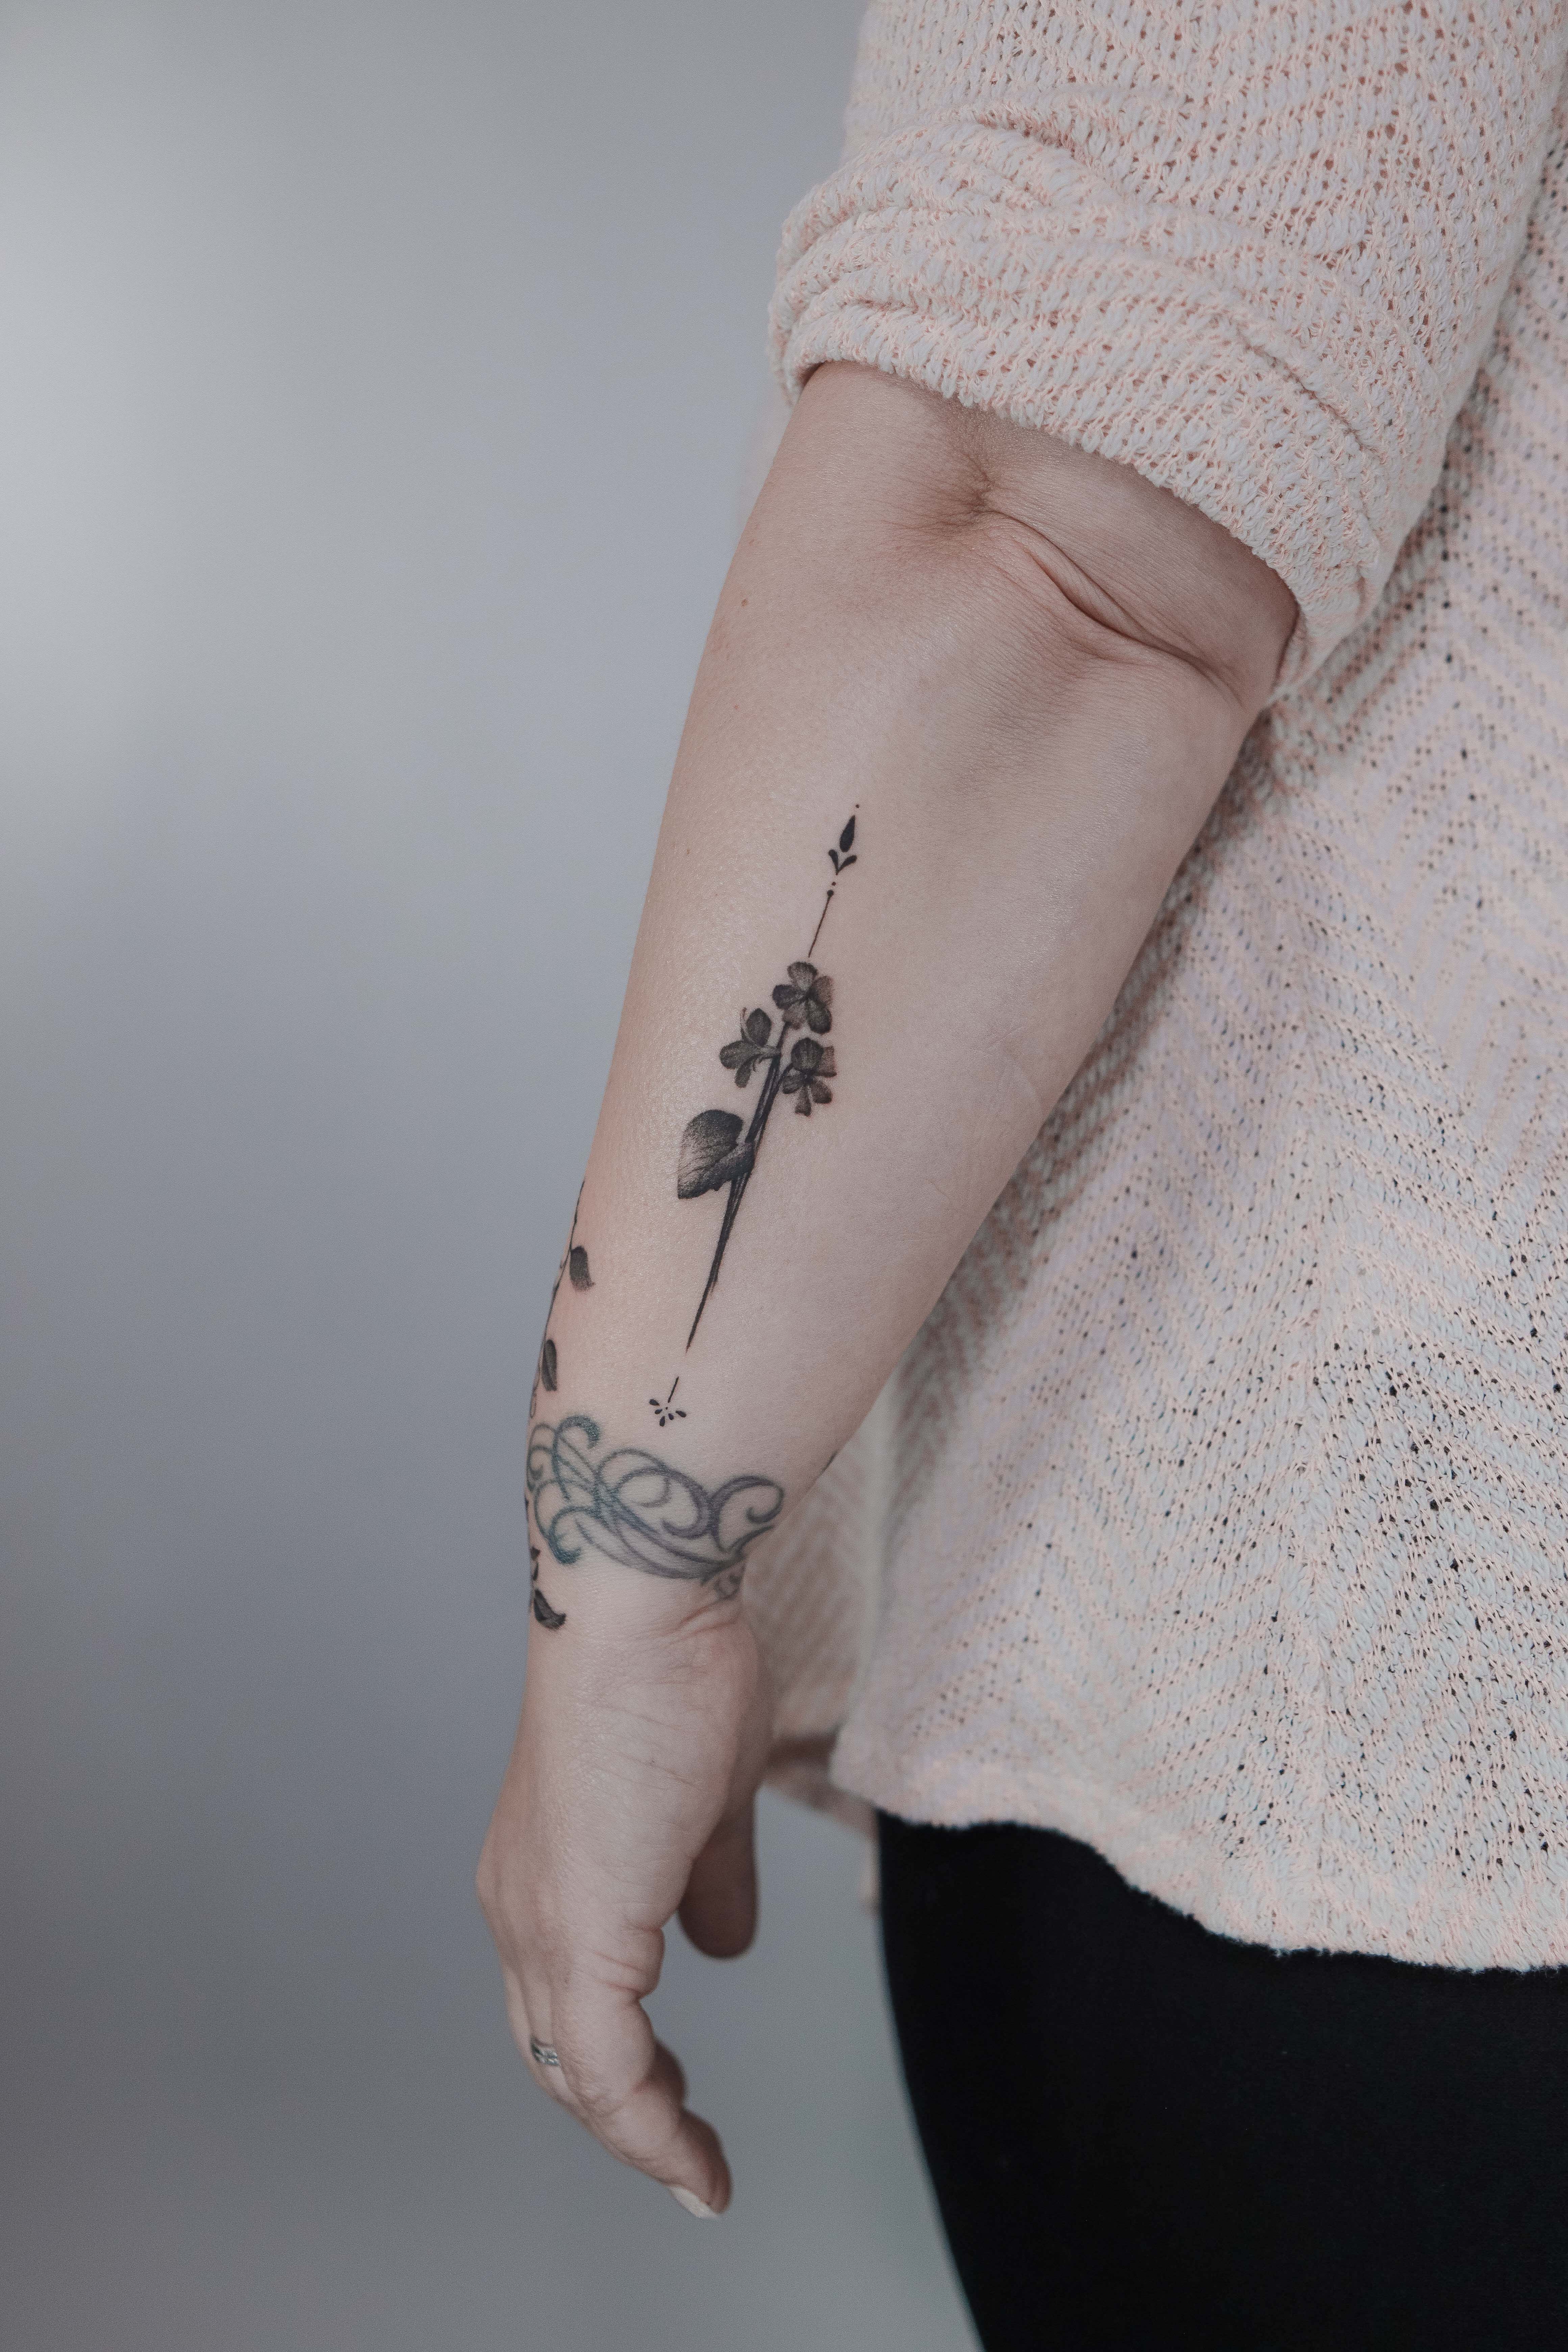 12 Birth Month Flower Tattoo Design Ideas For Your First Ink | Preview.ph